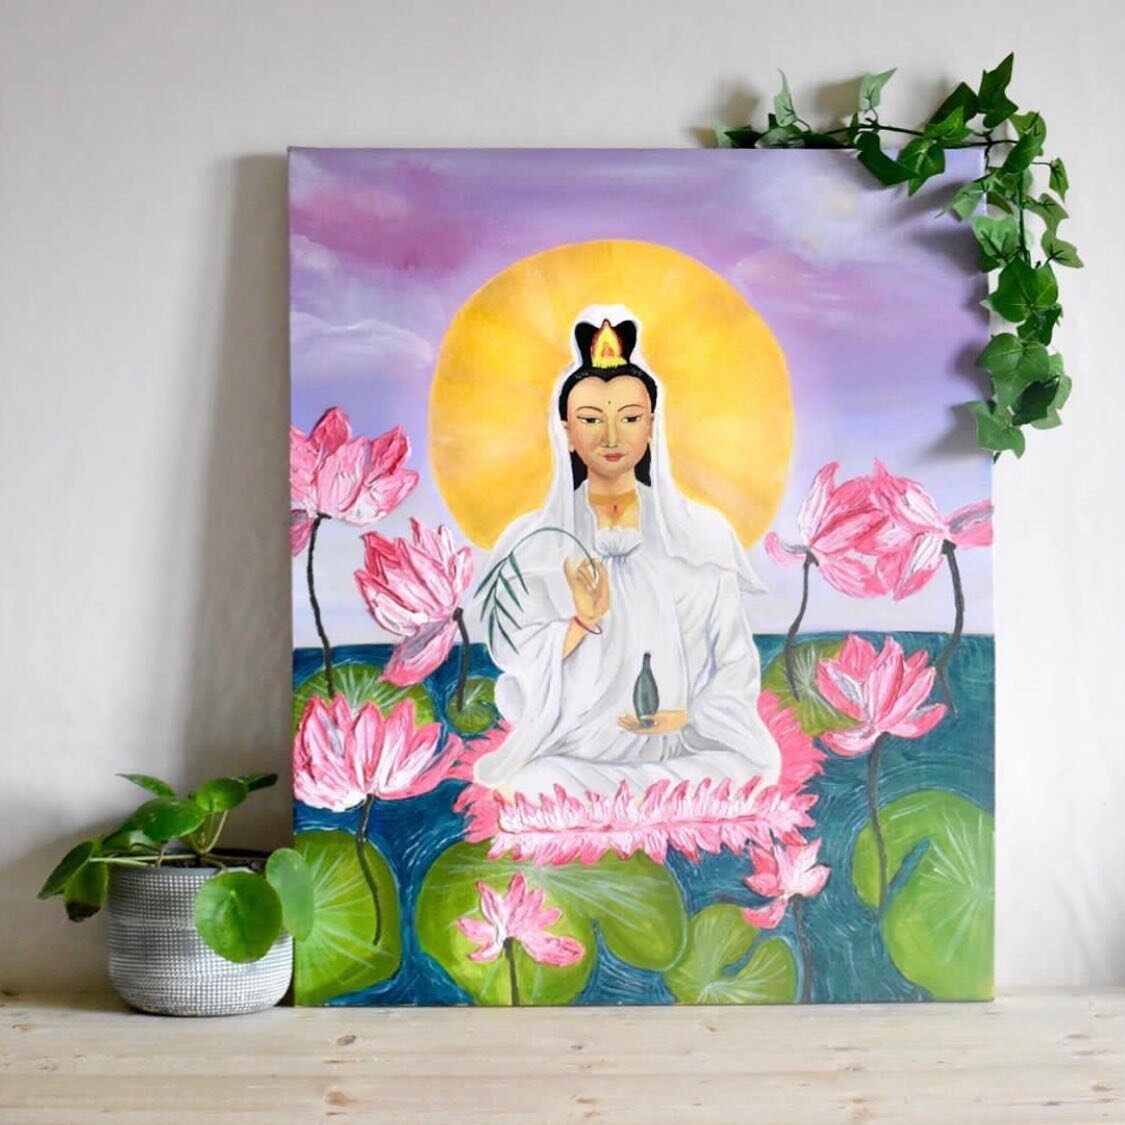 Quan Yin - The Goddess of Mercy and The Embodiment of Compassion. 

When I was a little girl, I see would depictions of Quan Yin everywhere. I remember one particular aunties house where I would sit by her shrine area and just stare at a poster of th